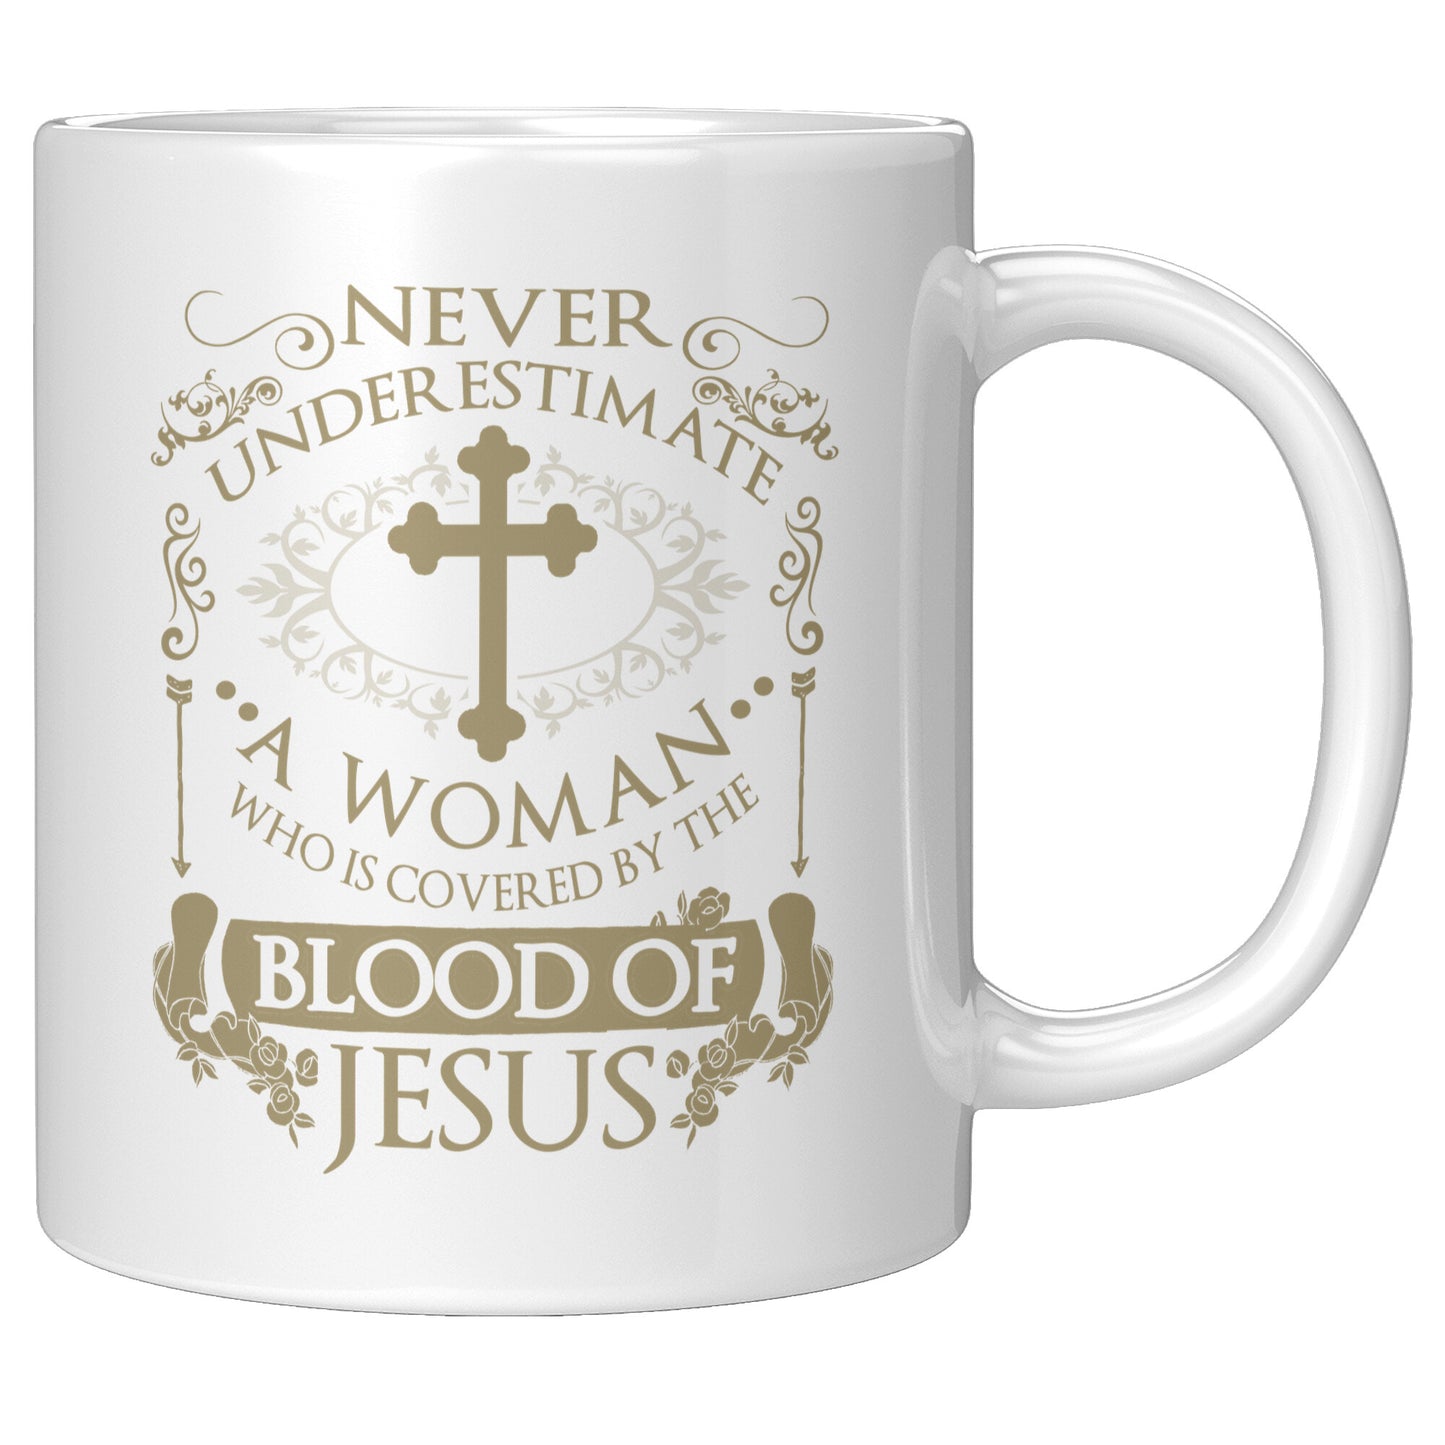 Covered By The Blood 11oz Mug